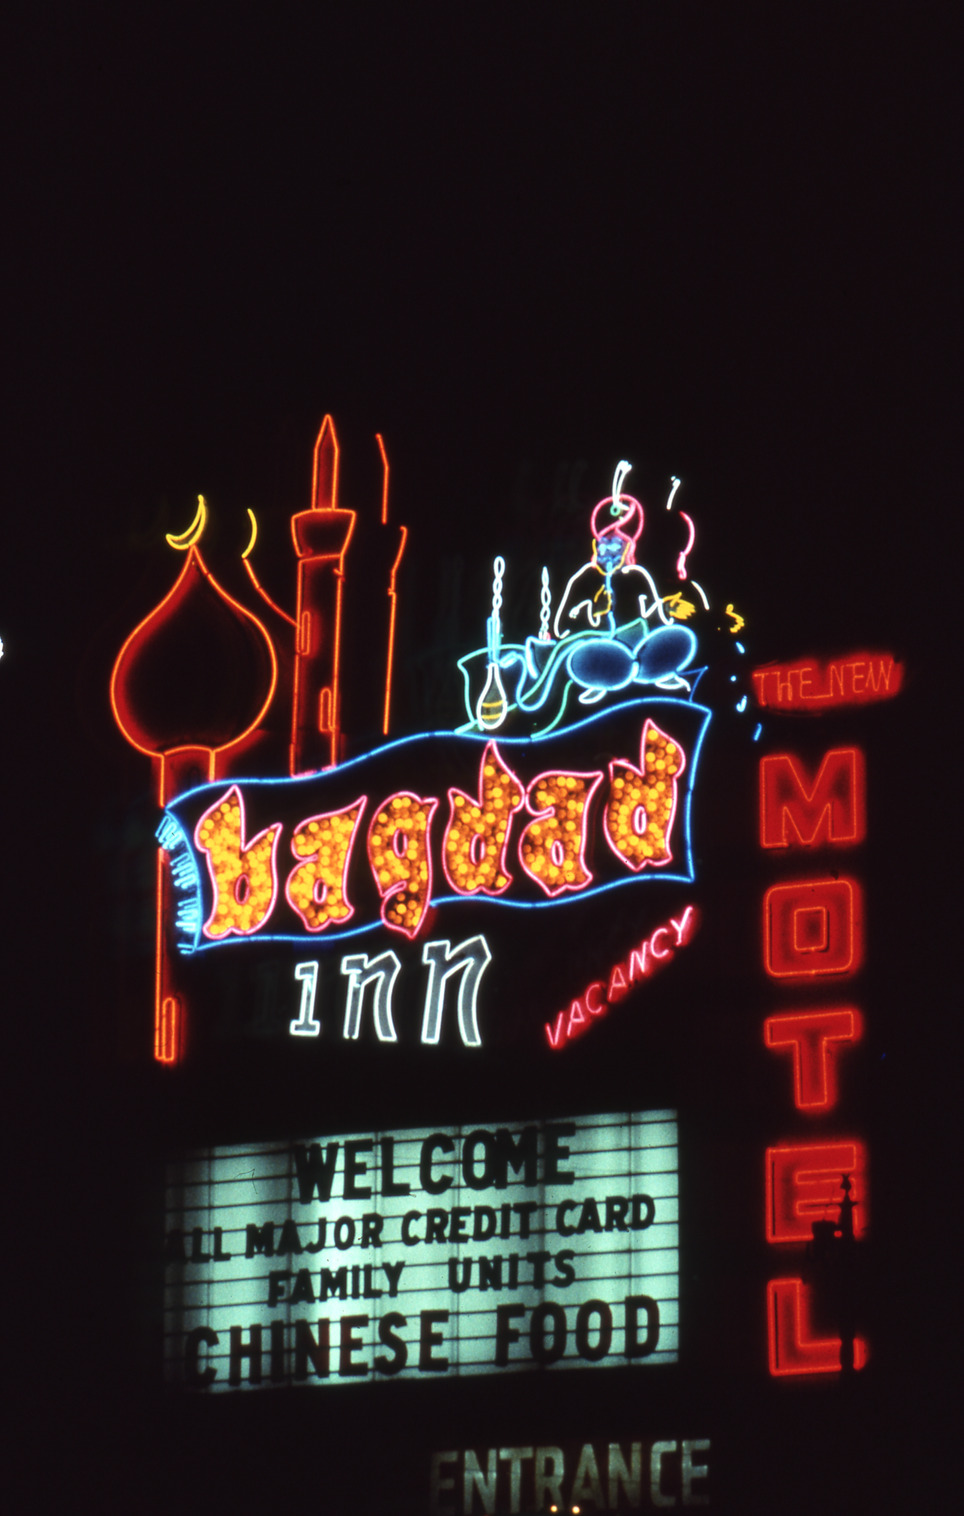 Bagdad Inn Motel double mounted pylon and marquee signs, Las Vegas, Nevada: photographic print